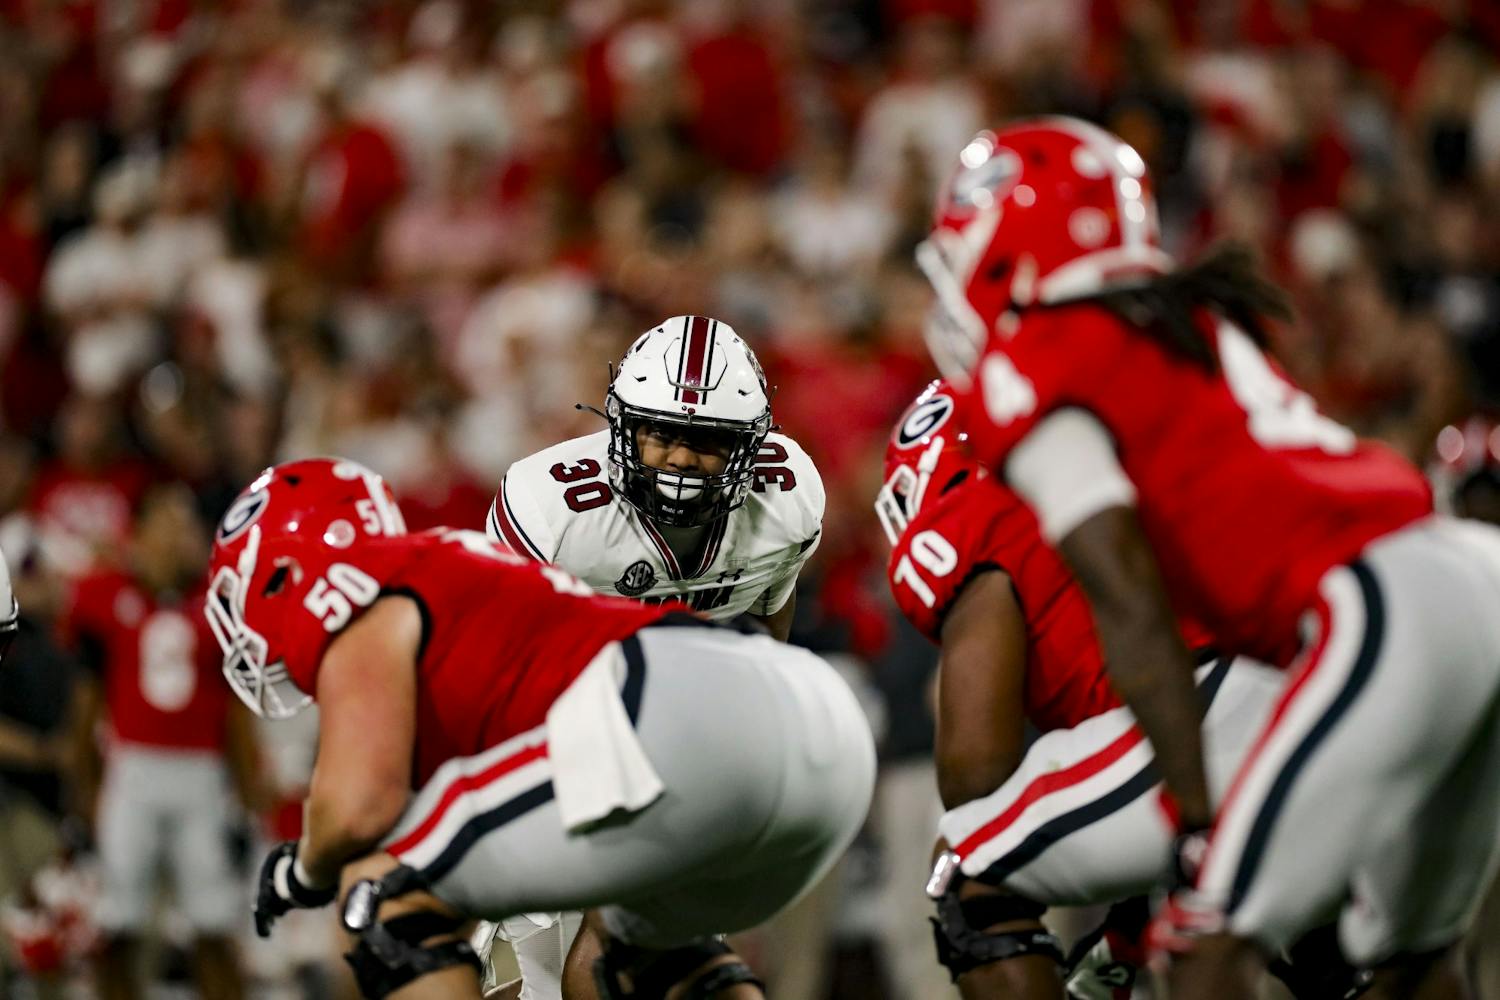 Fifth-year linebacker Damani Staley observes Georgia's offense before a play in South Carolina's game against Georgia on Sept. 18, 2021.